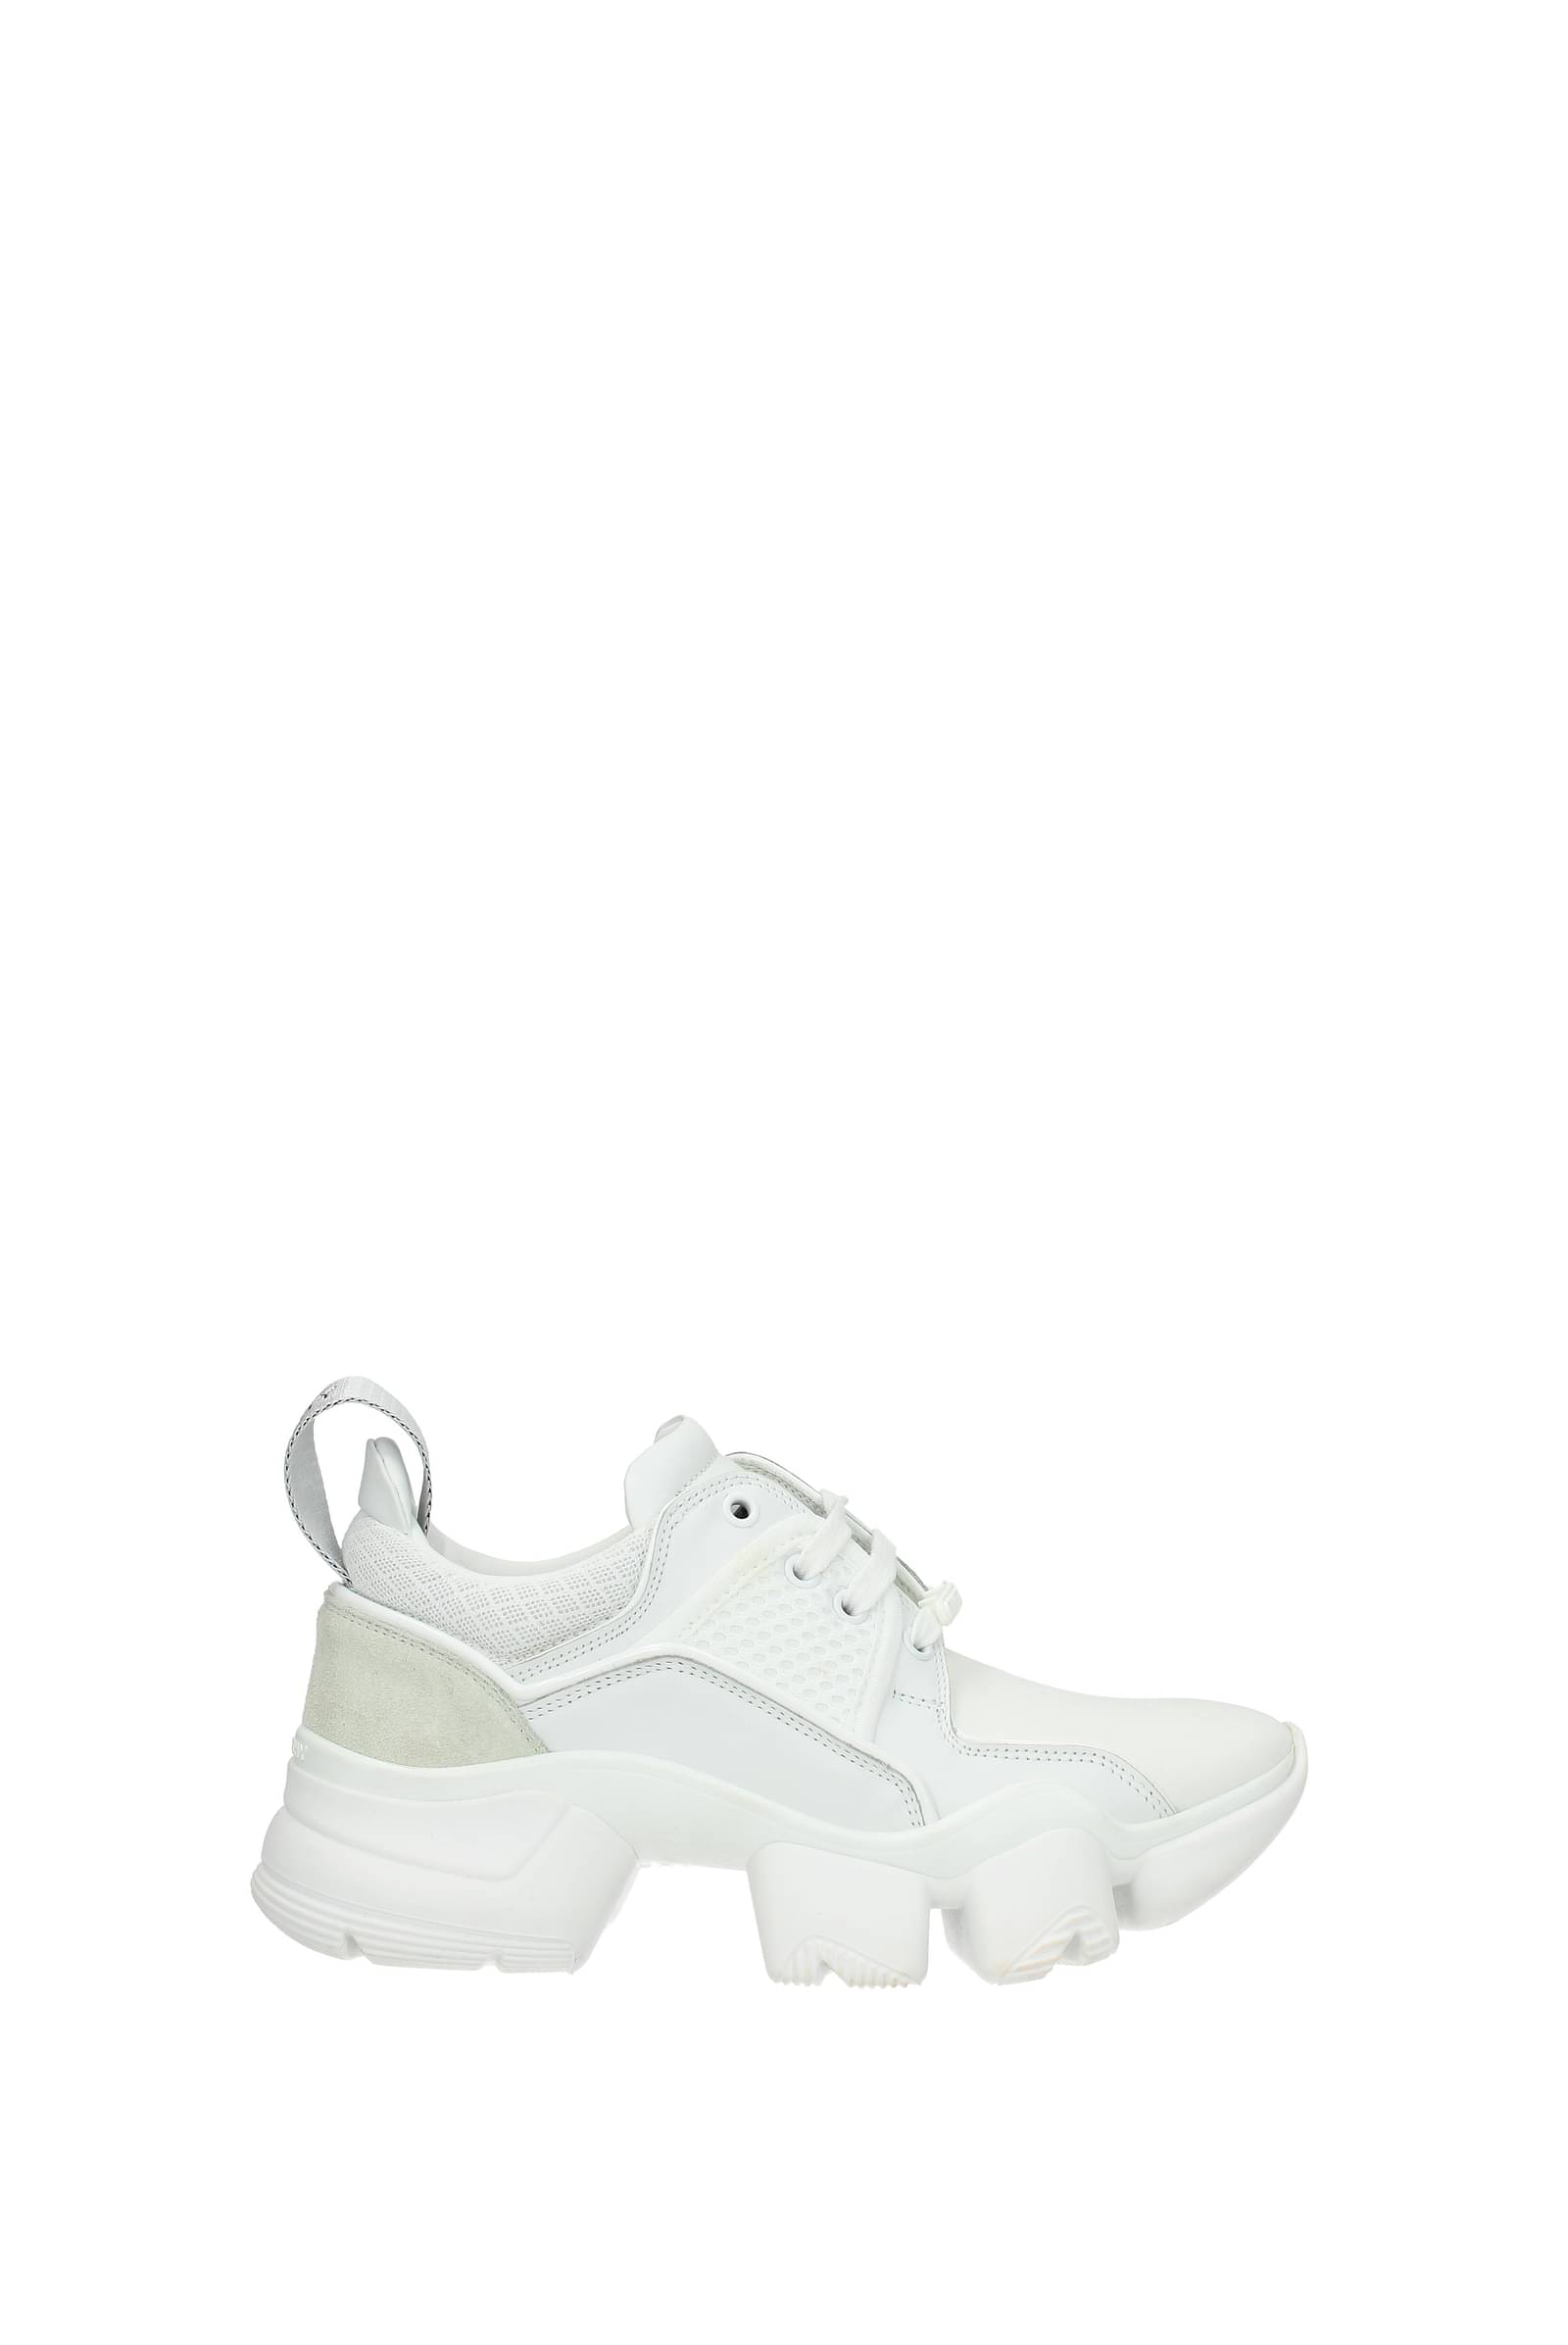 Givenchy Sneakers jaw Women 